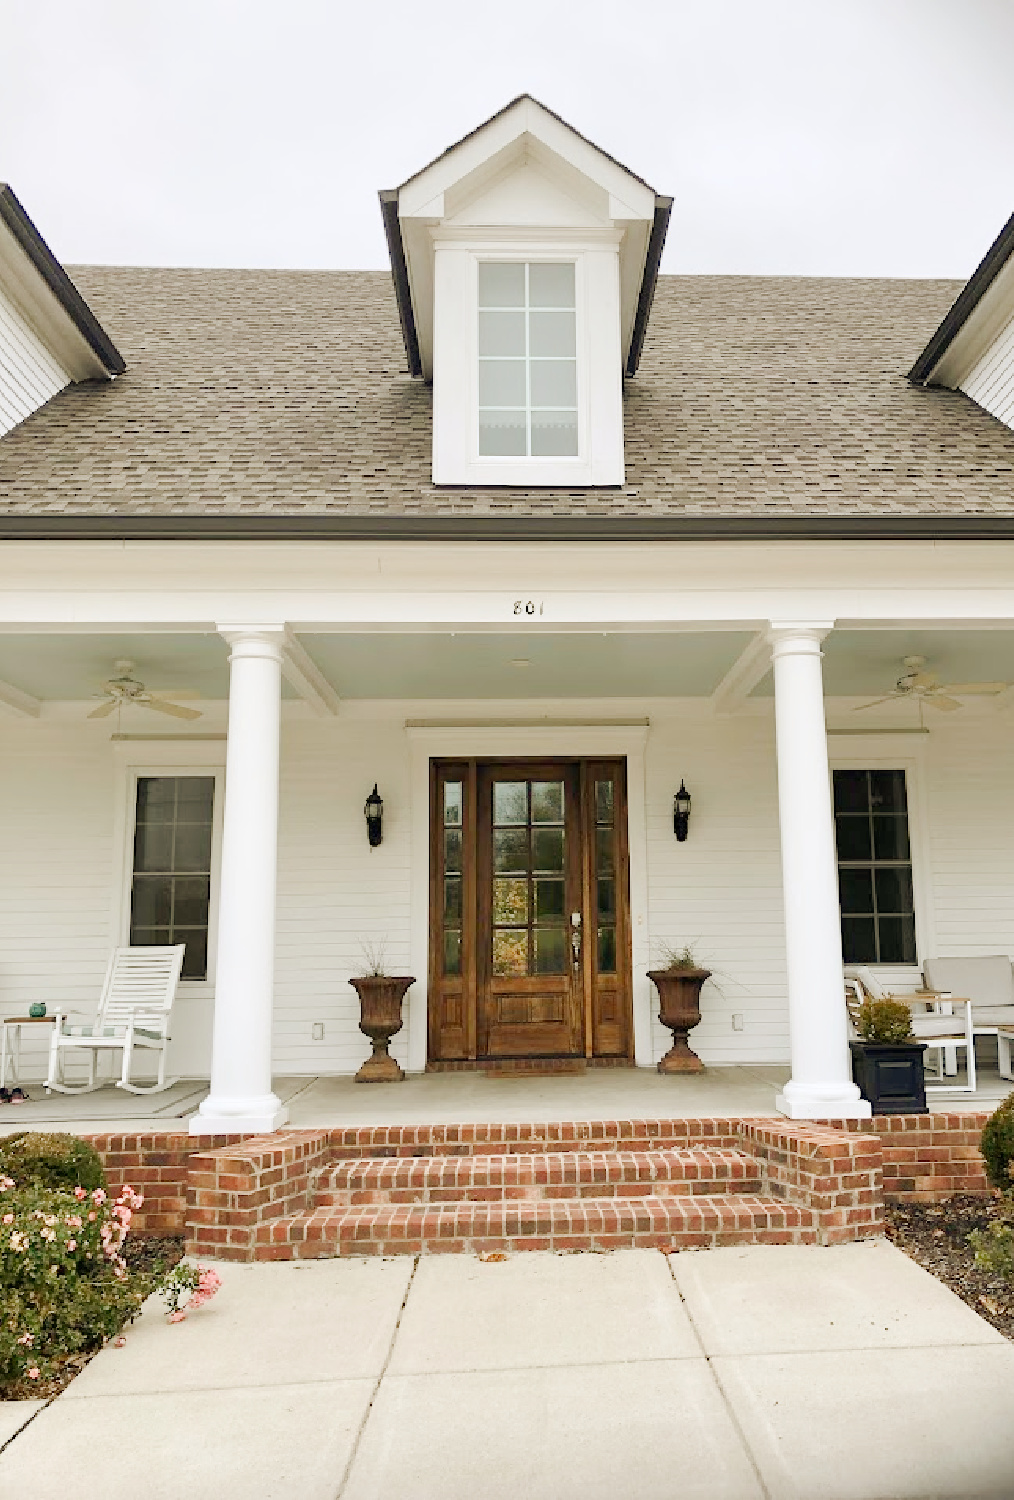 White traditional Southern cottage style home with wide front porch, columns and dormers - Franklin, TN - Hello Lovely Studio.